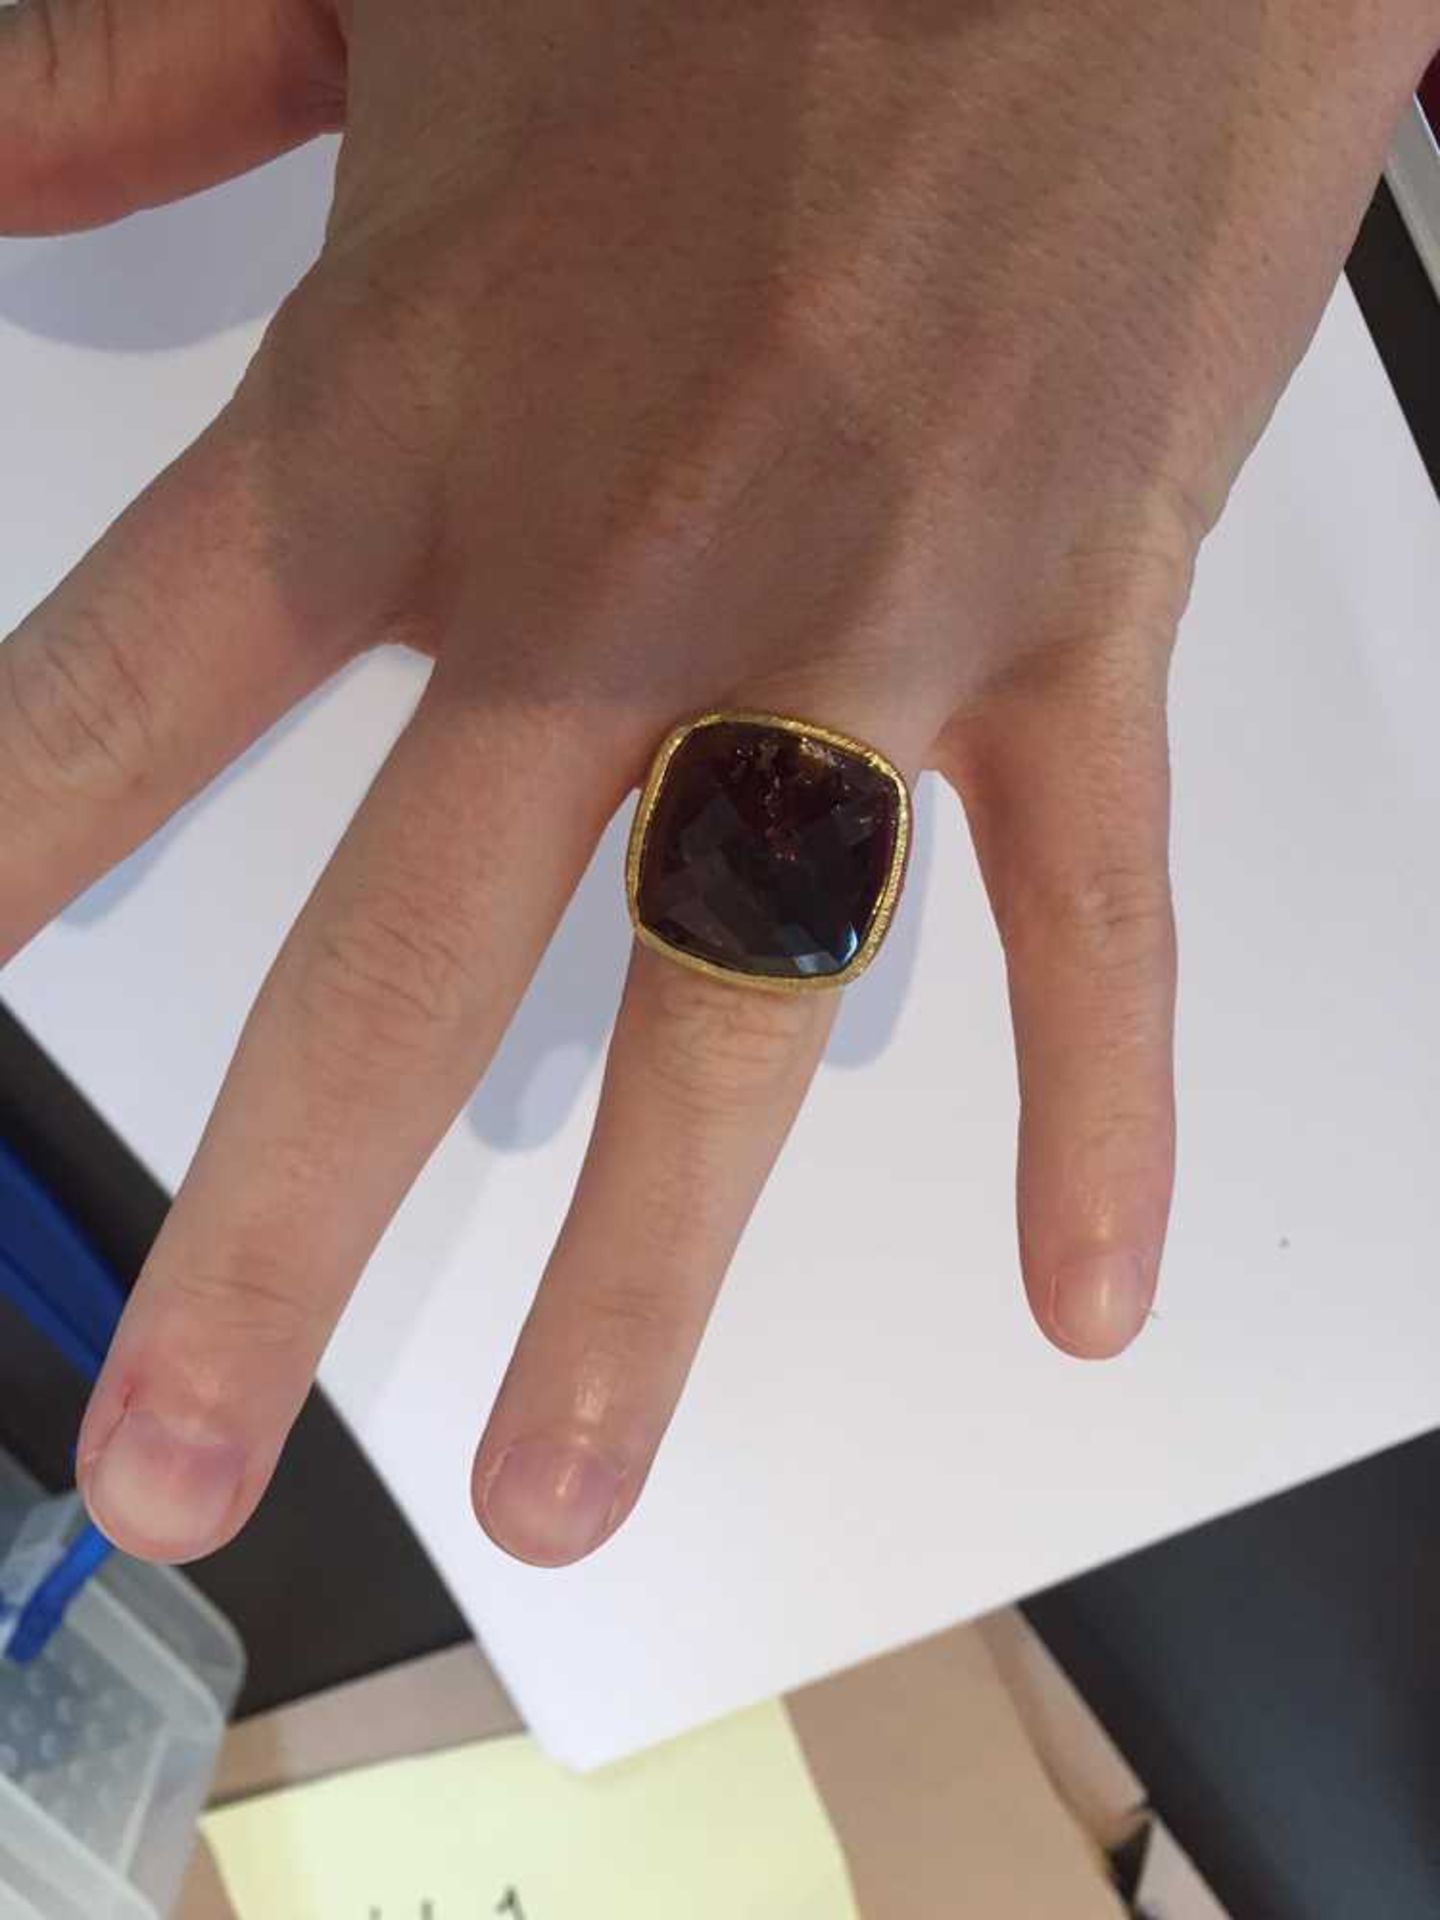 A tourmaline cocktail ring - Image 10 of 10